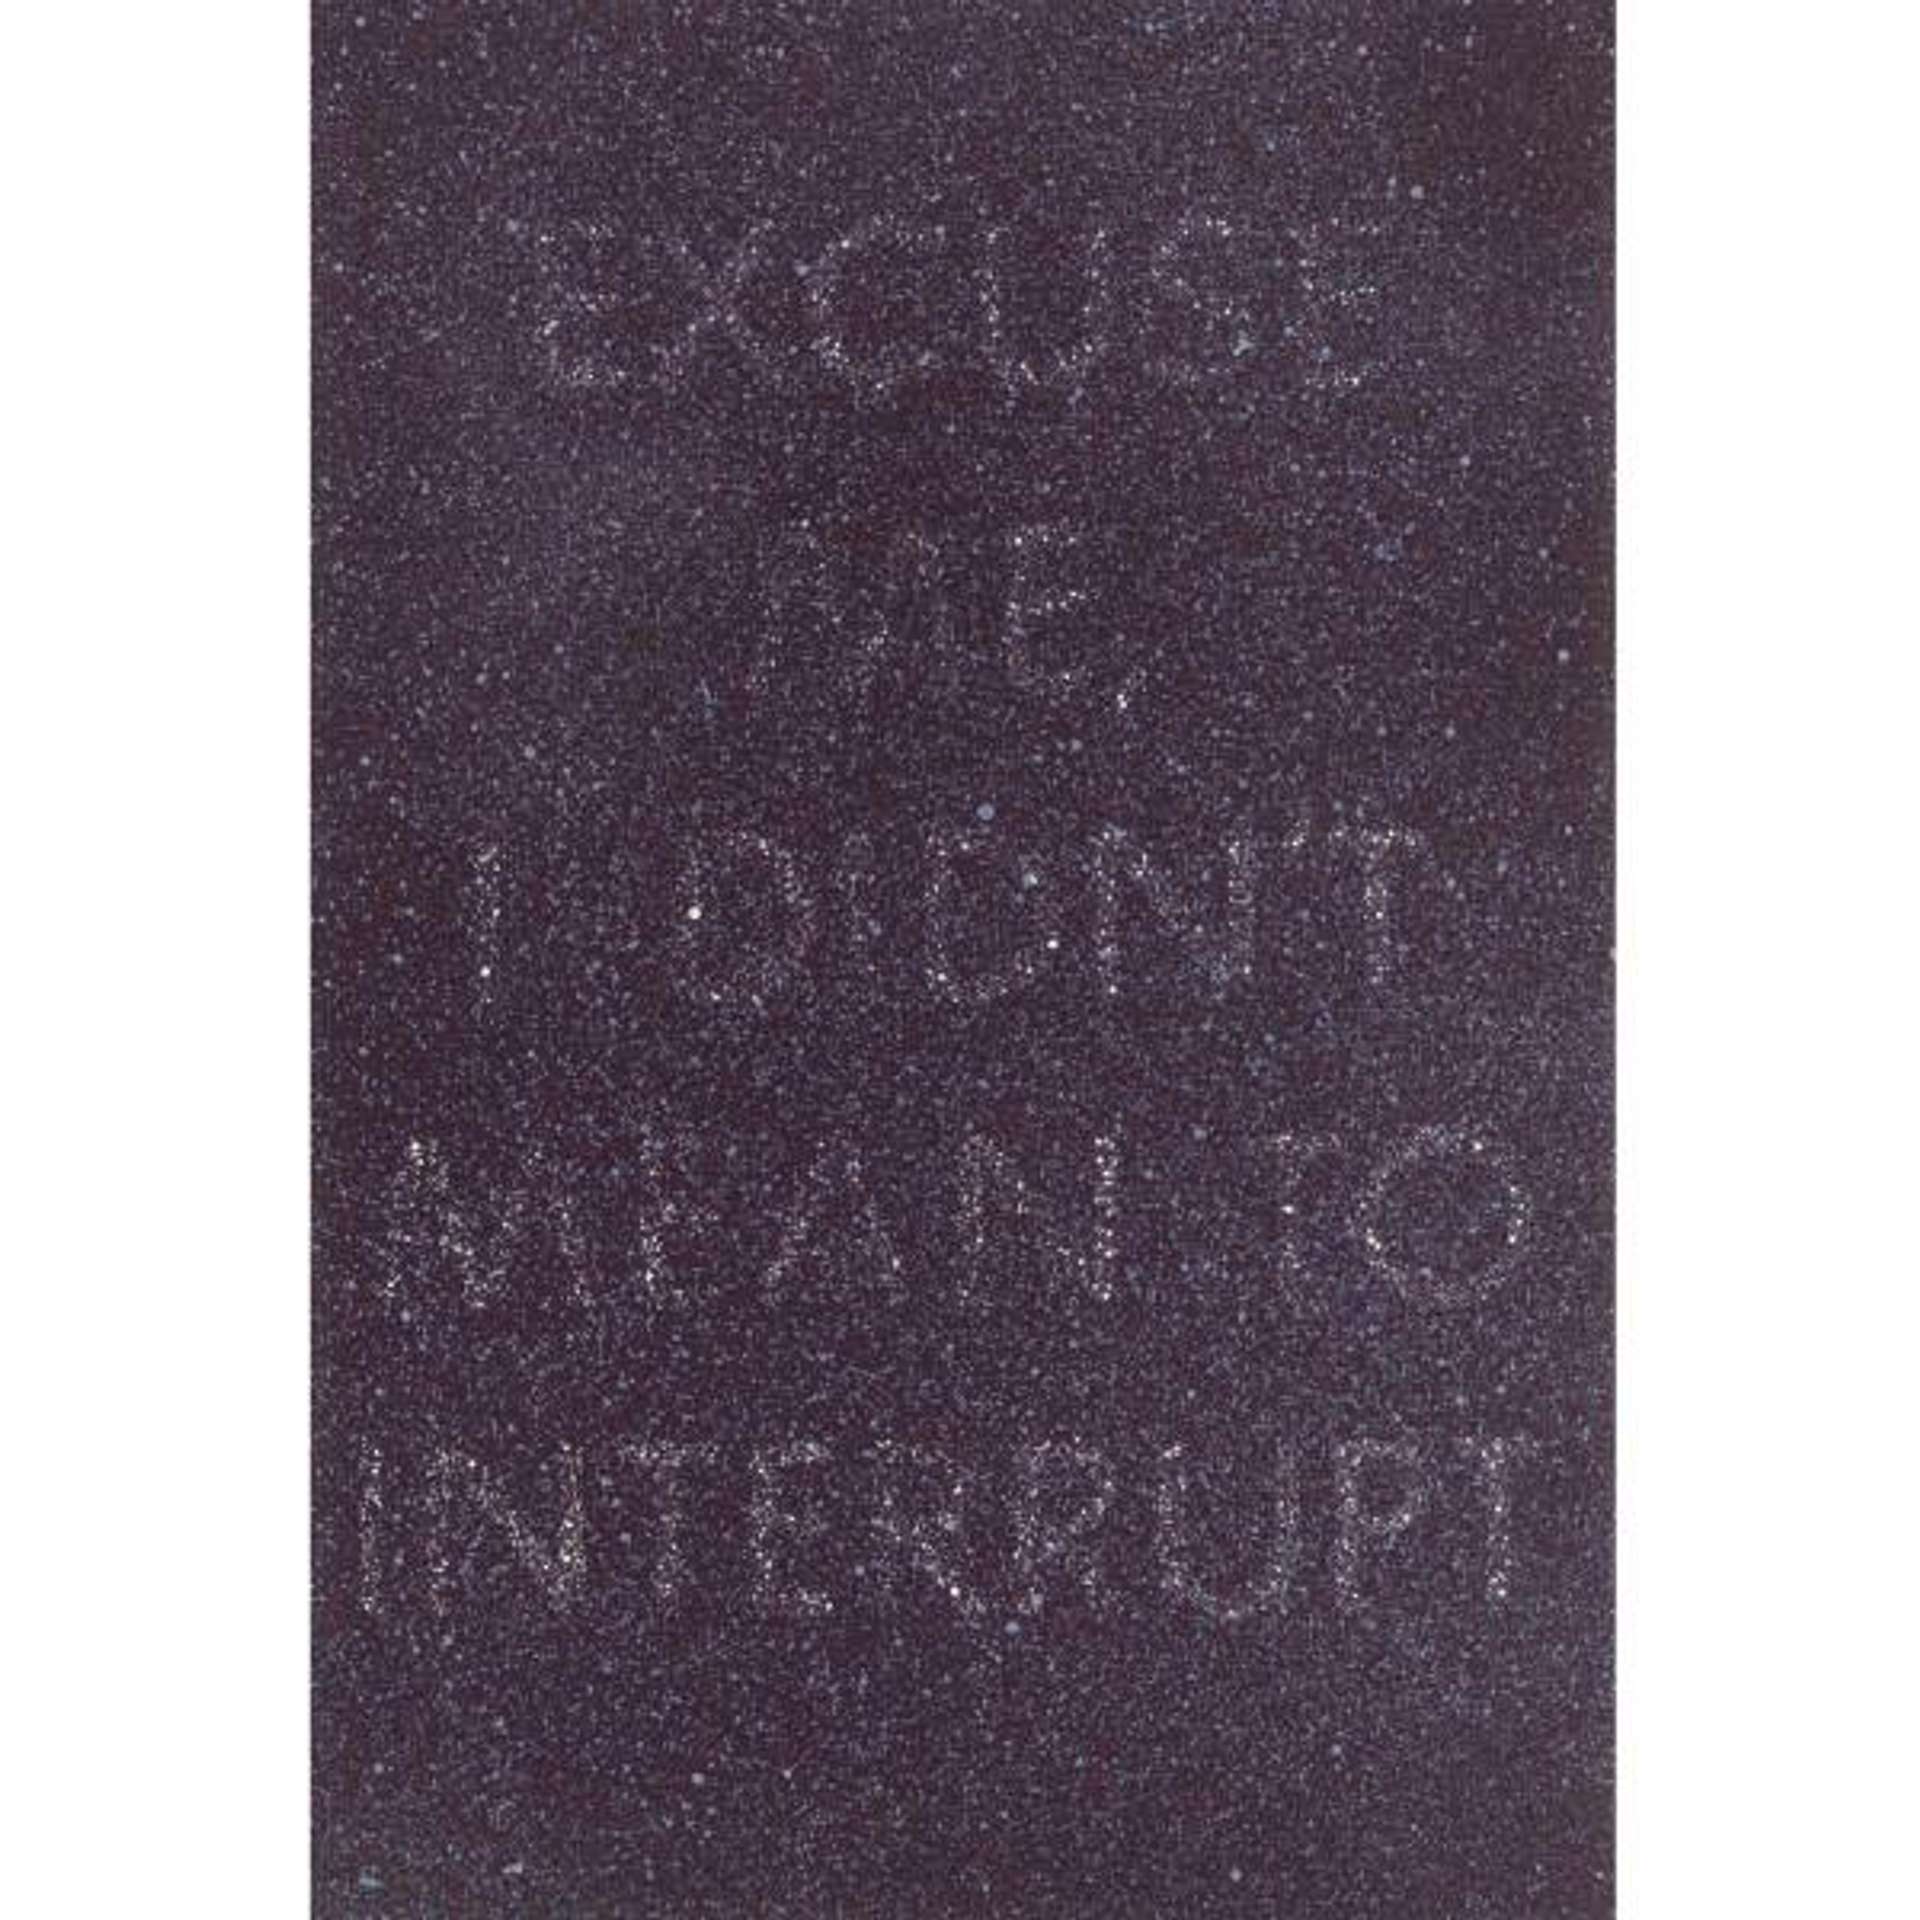 Excuse Me, I Didn't Mean To Interrupt - Signed Print by Ed Ruscha 1975 - MyArtBroker